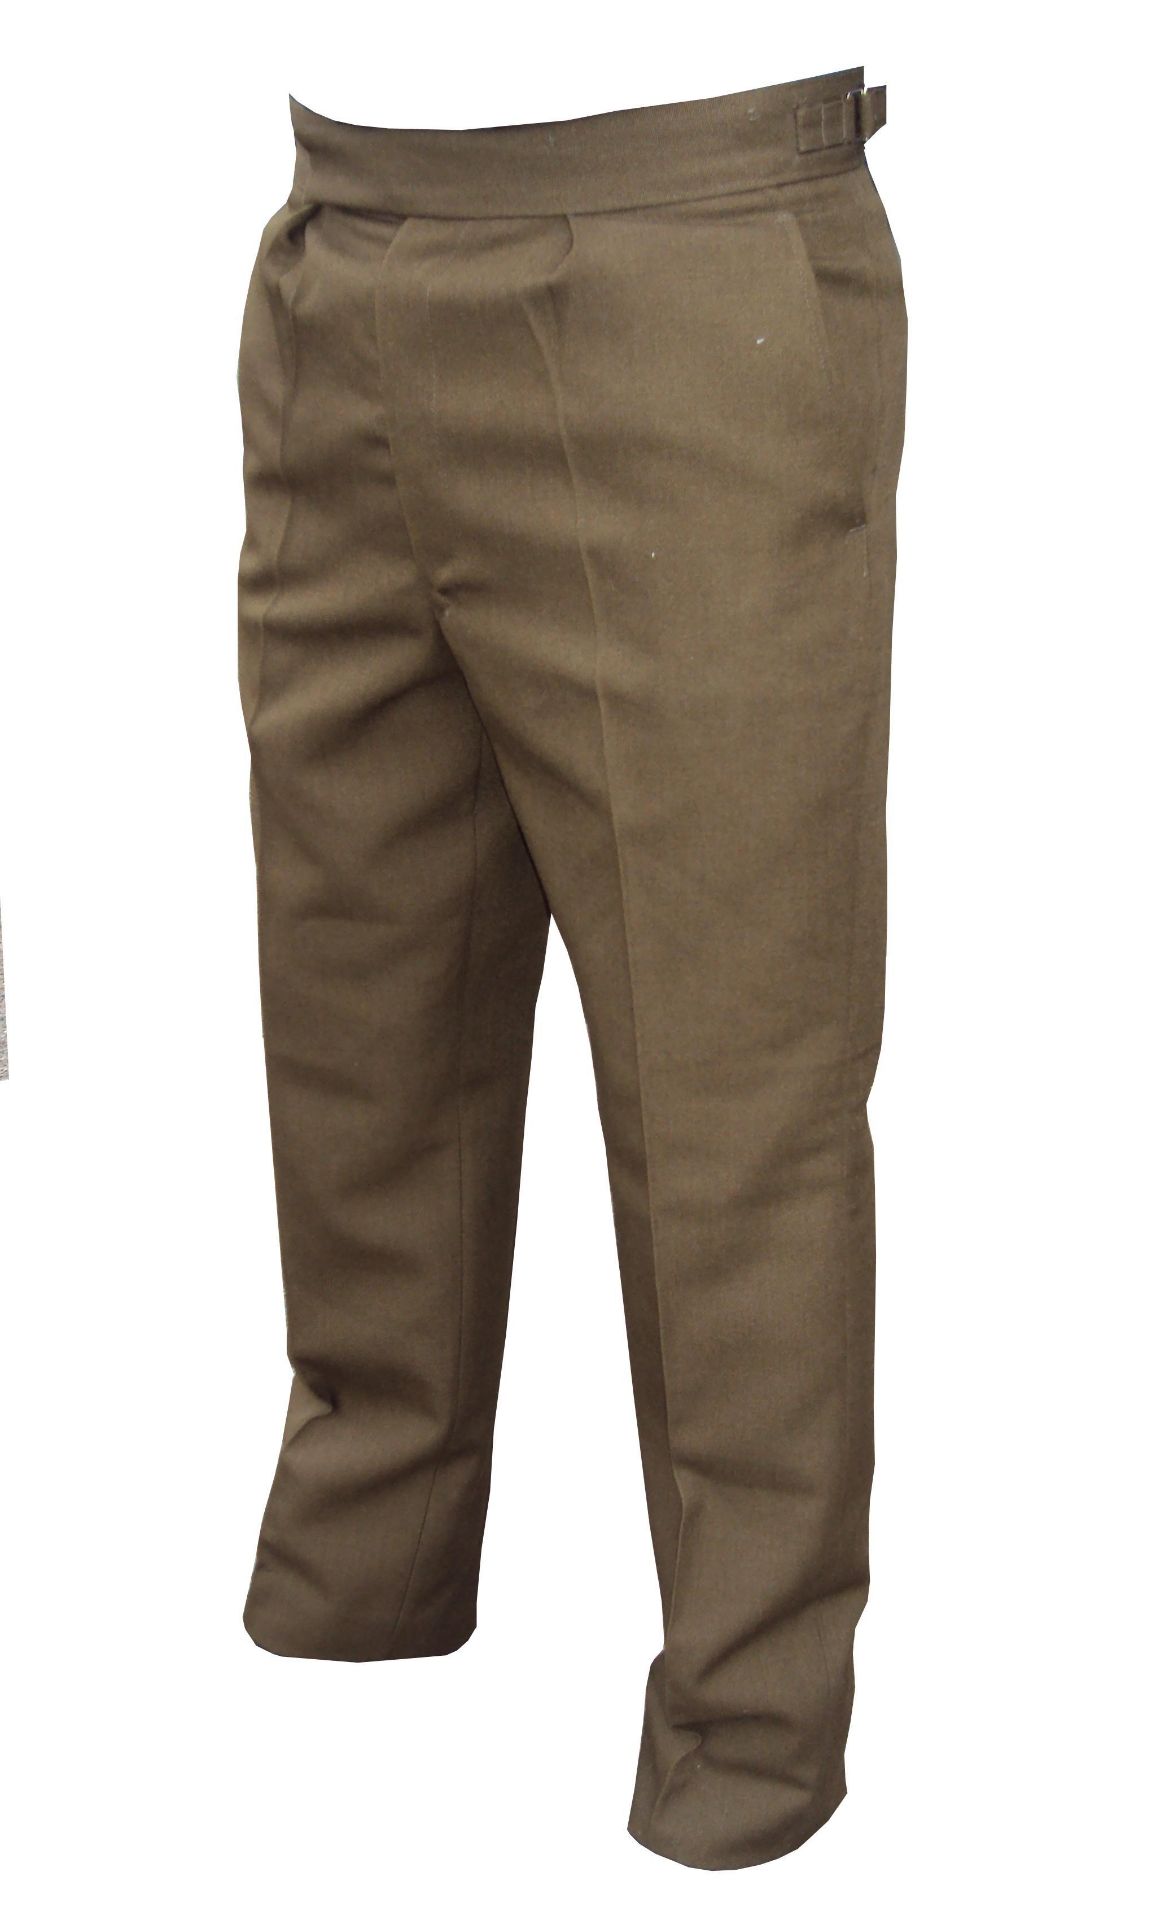 Pack of 30 - No.2 Trousers - Grade 1